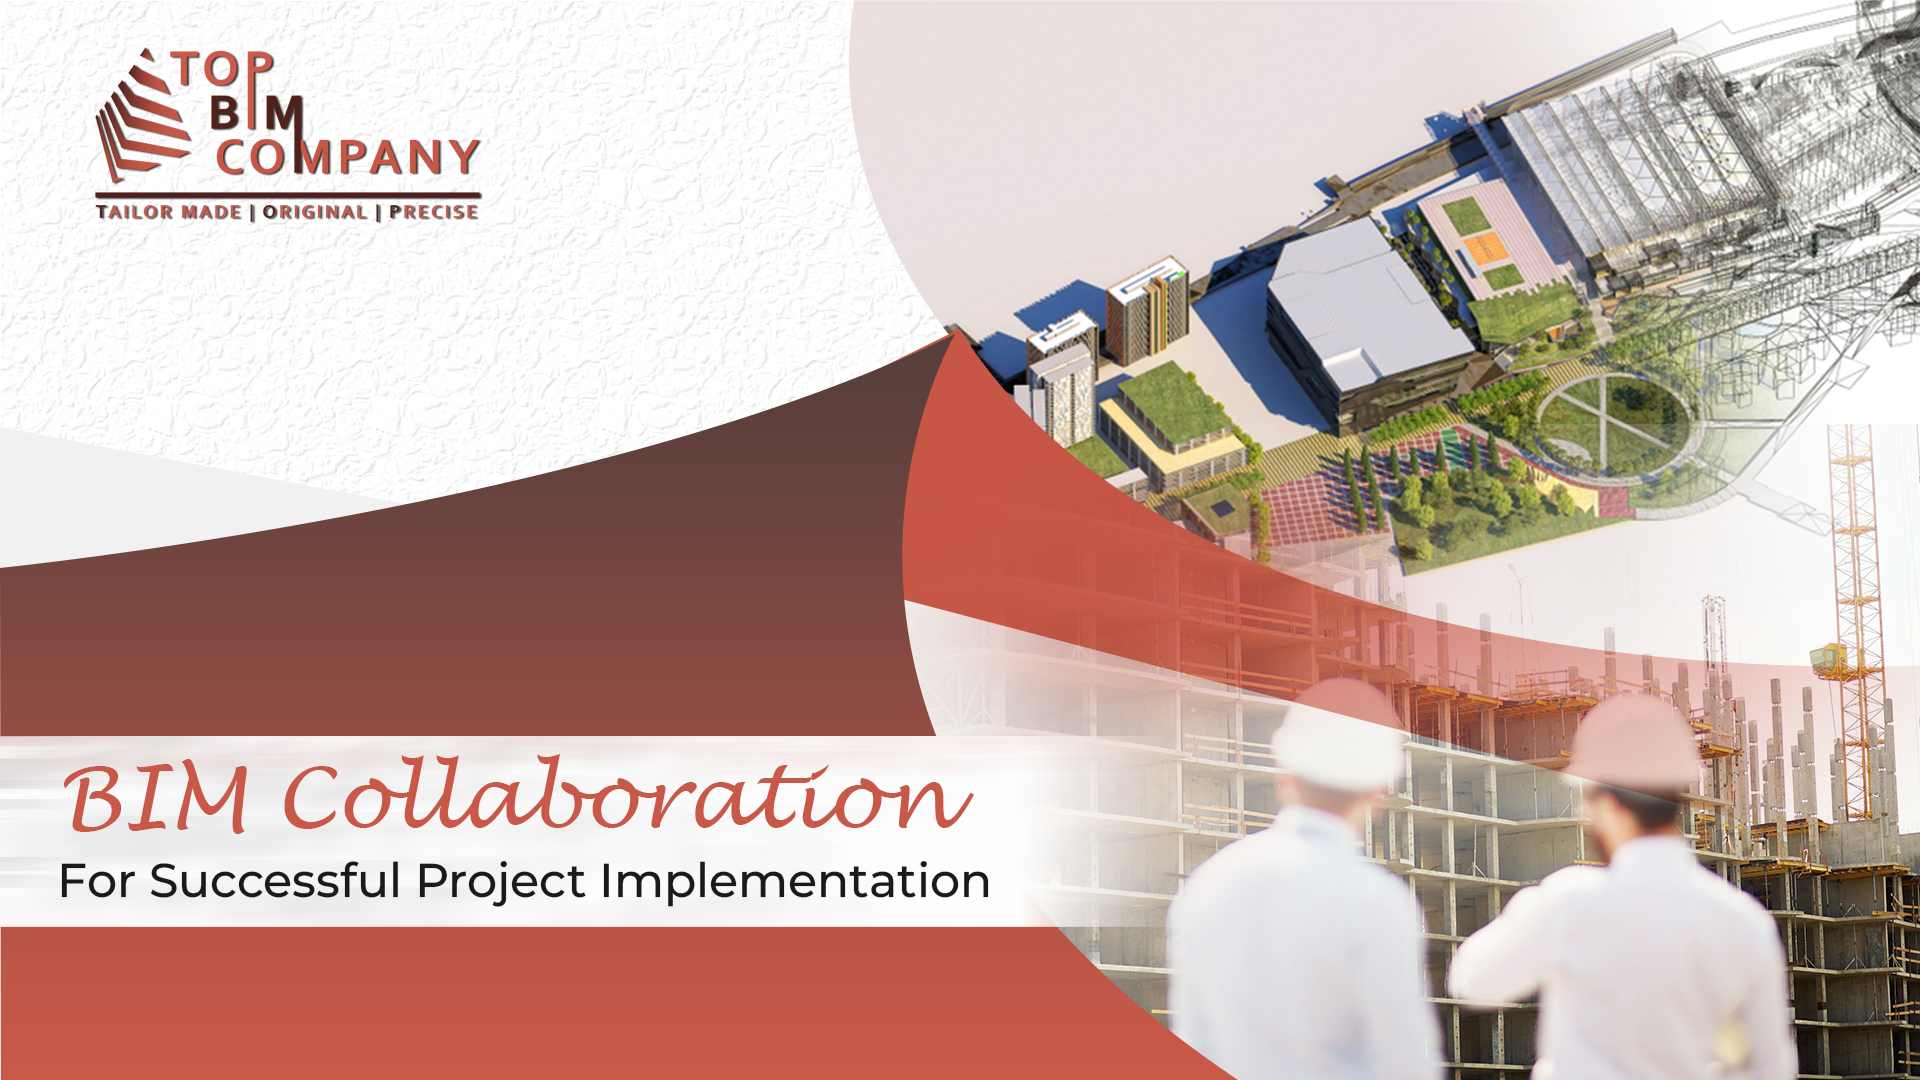 BIM Collaboration For Successful Project Implementation